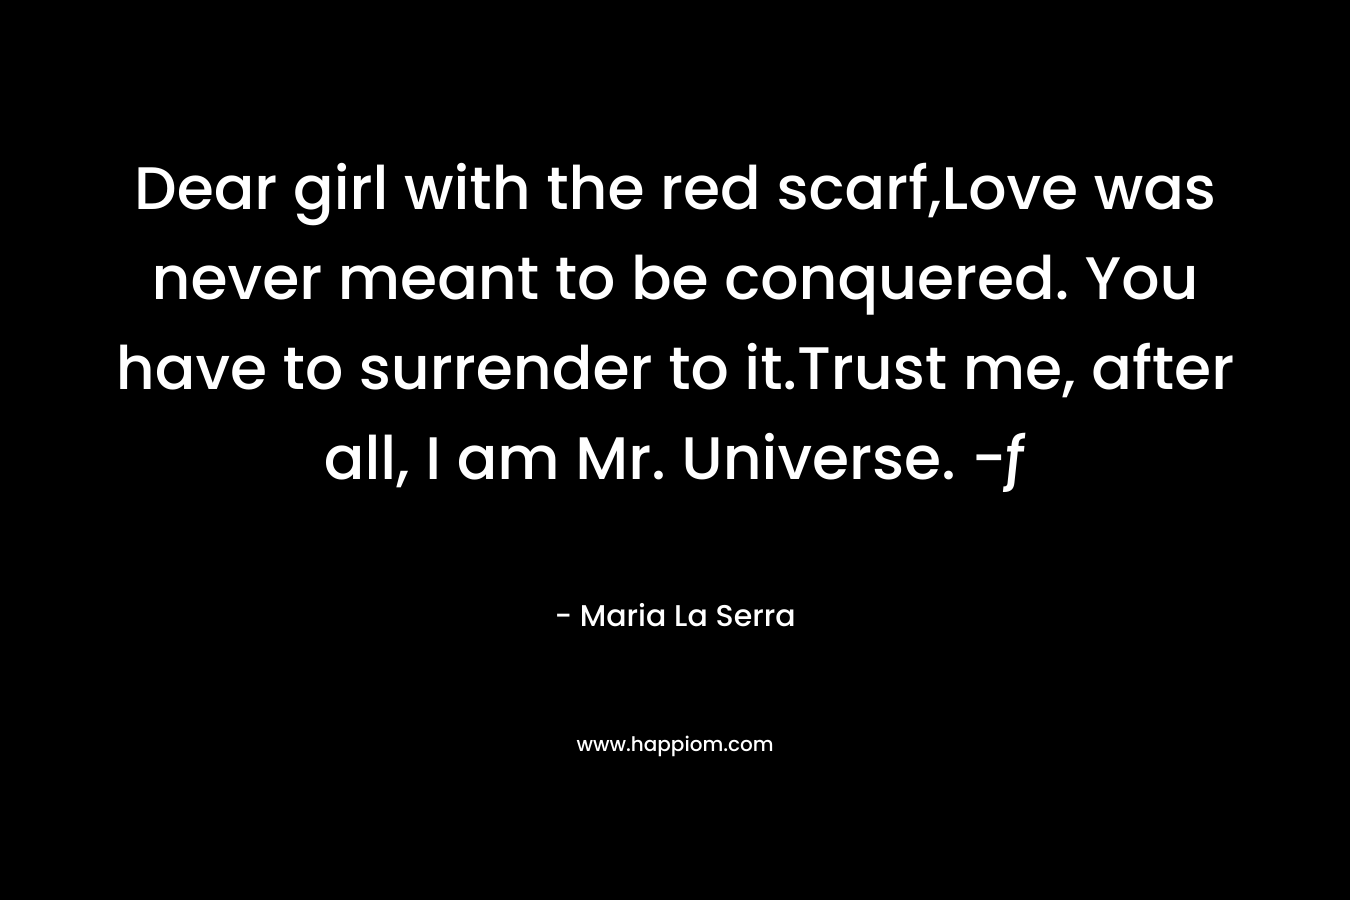 Dear girl with the red scarf,Love was never meant to be conquered. You have to surrender to it.Trust me, after all, I am Mr. Universe. -ƒ – Maria La Serra